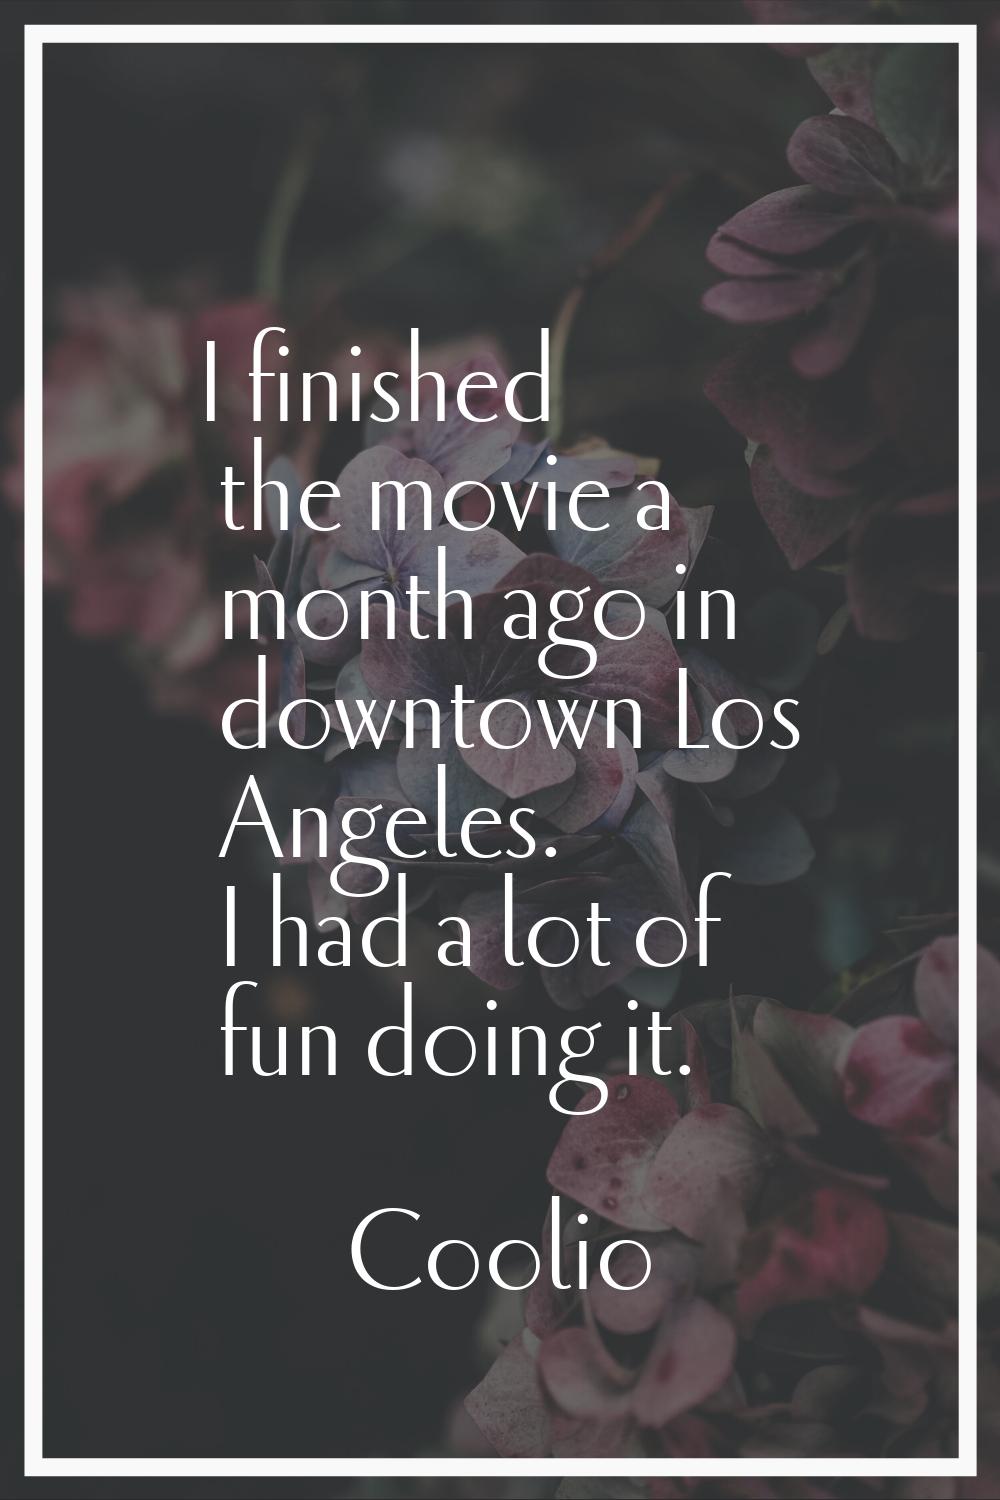 I finished the movie a month ago in downtown Los Angeles. I had a lot of fun doing it.